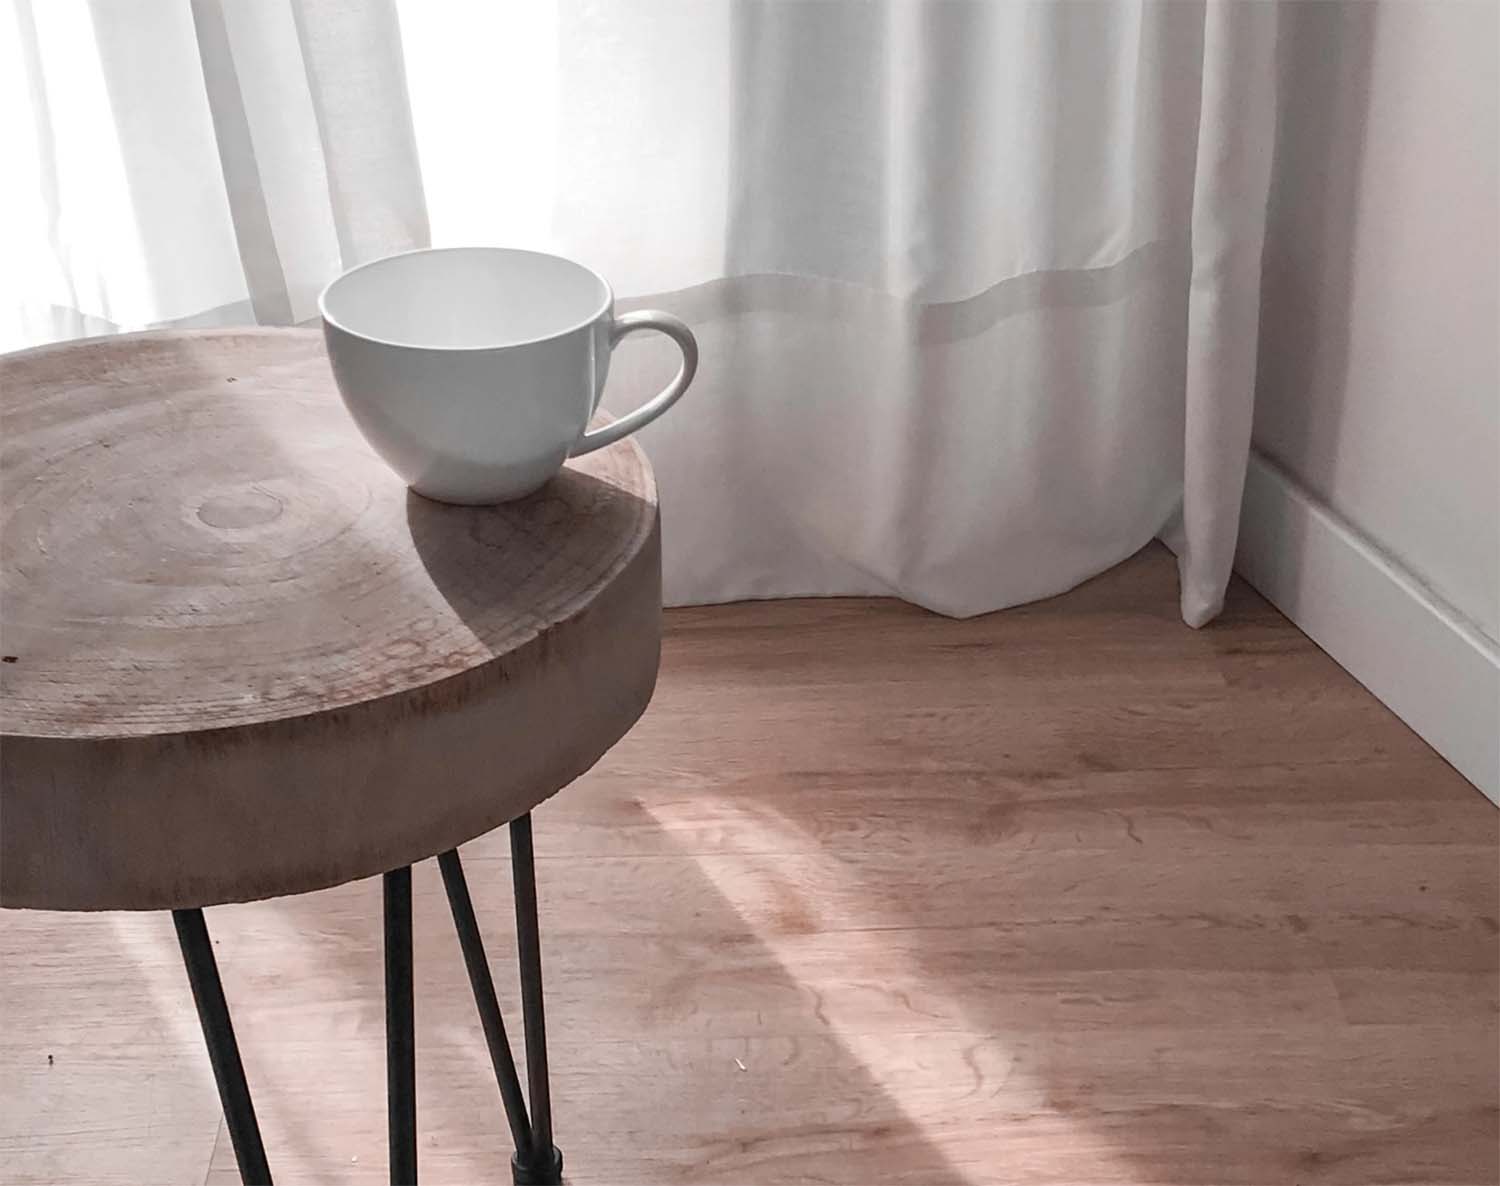 Sleep Foundation image of cup on side table